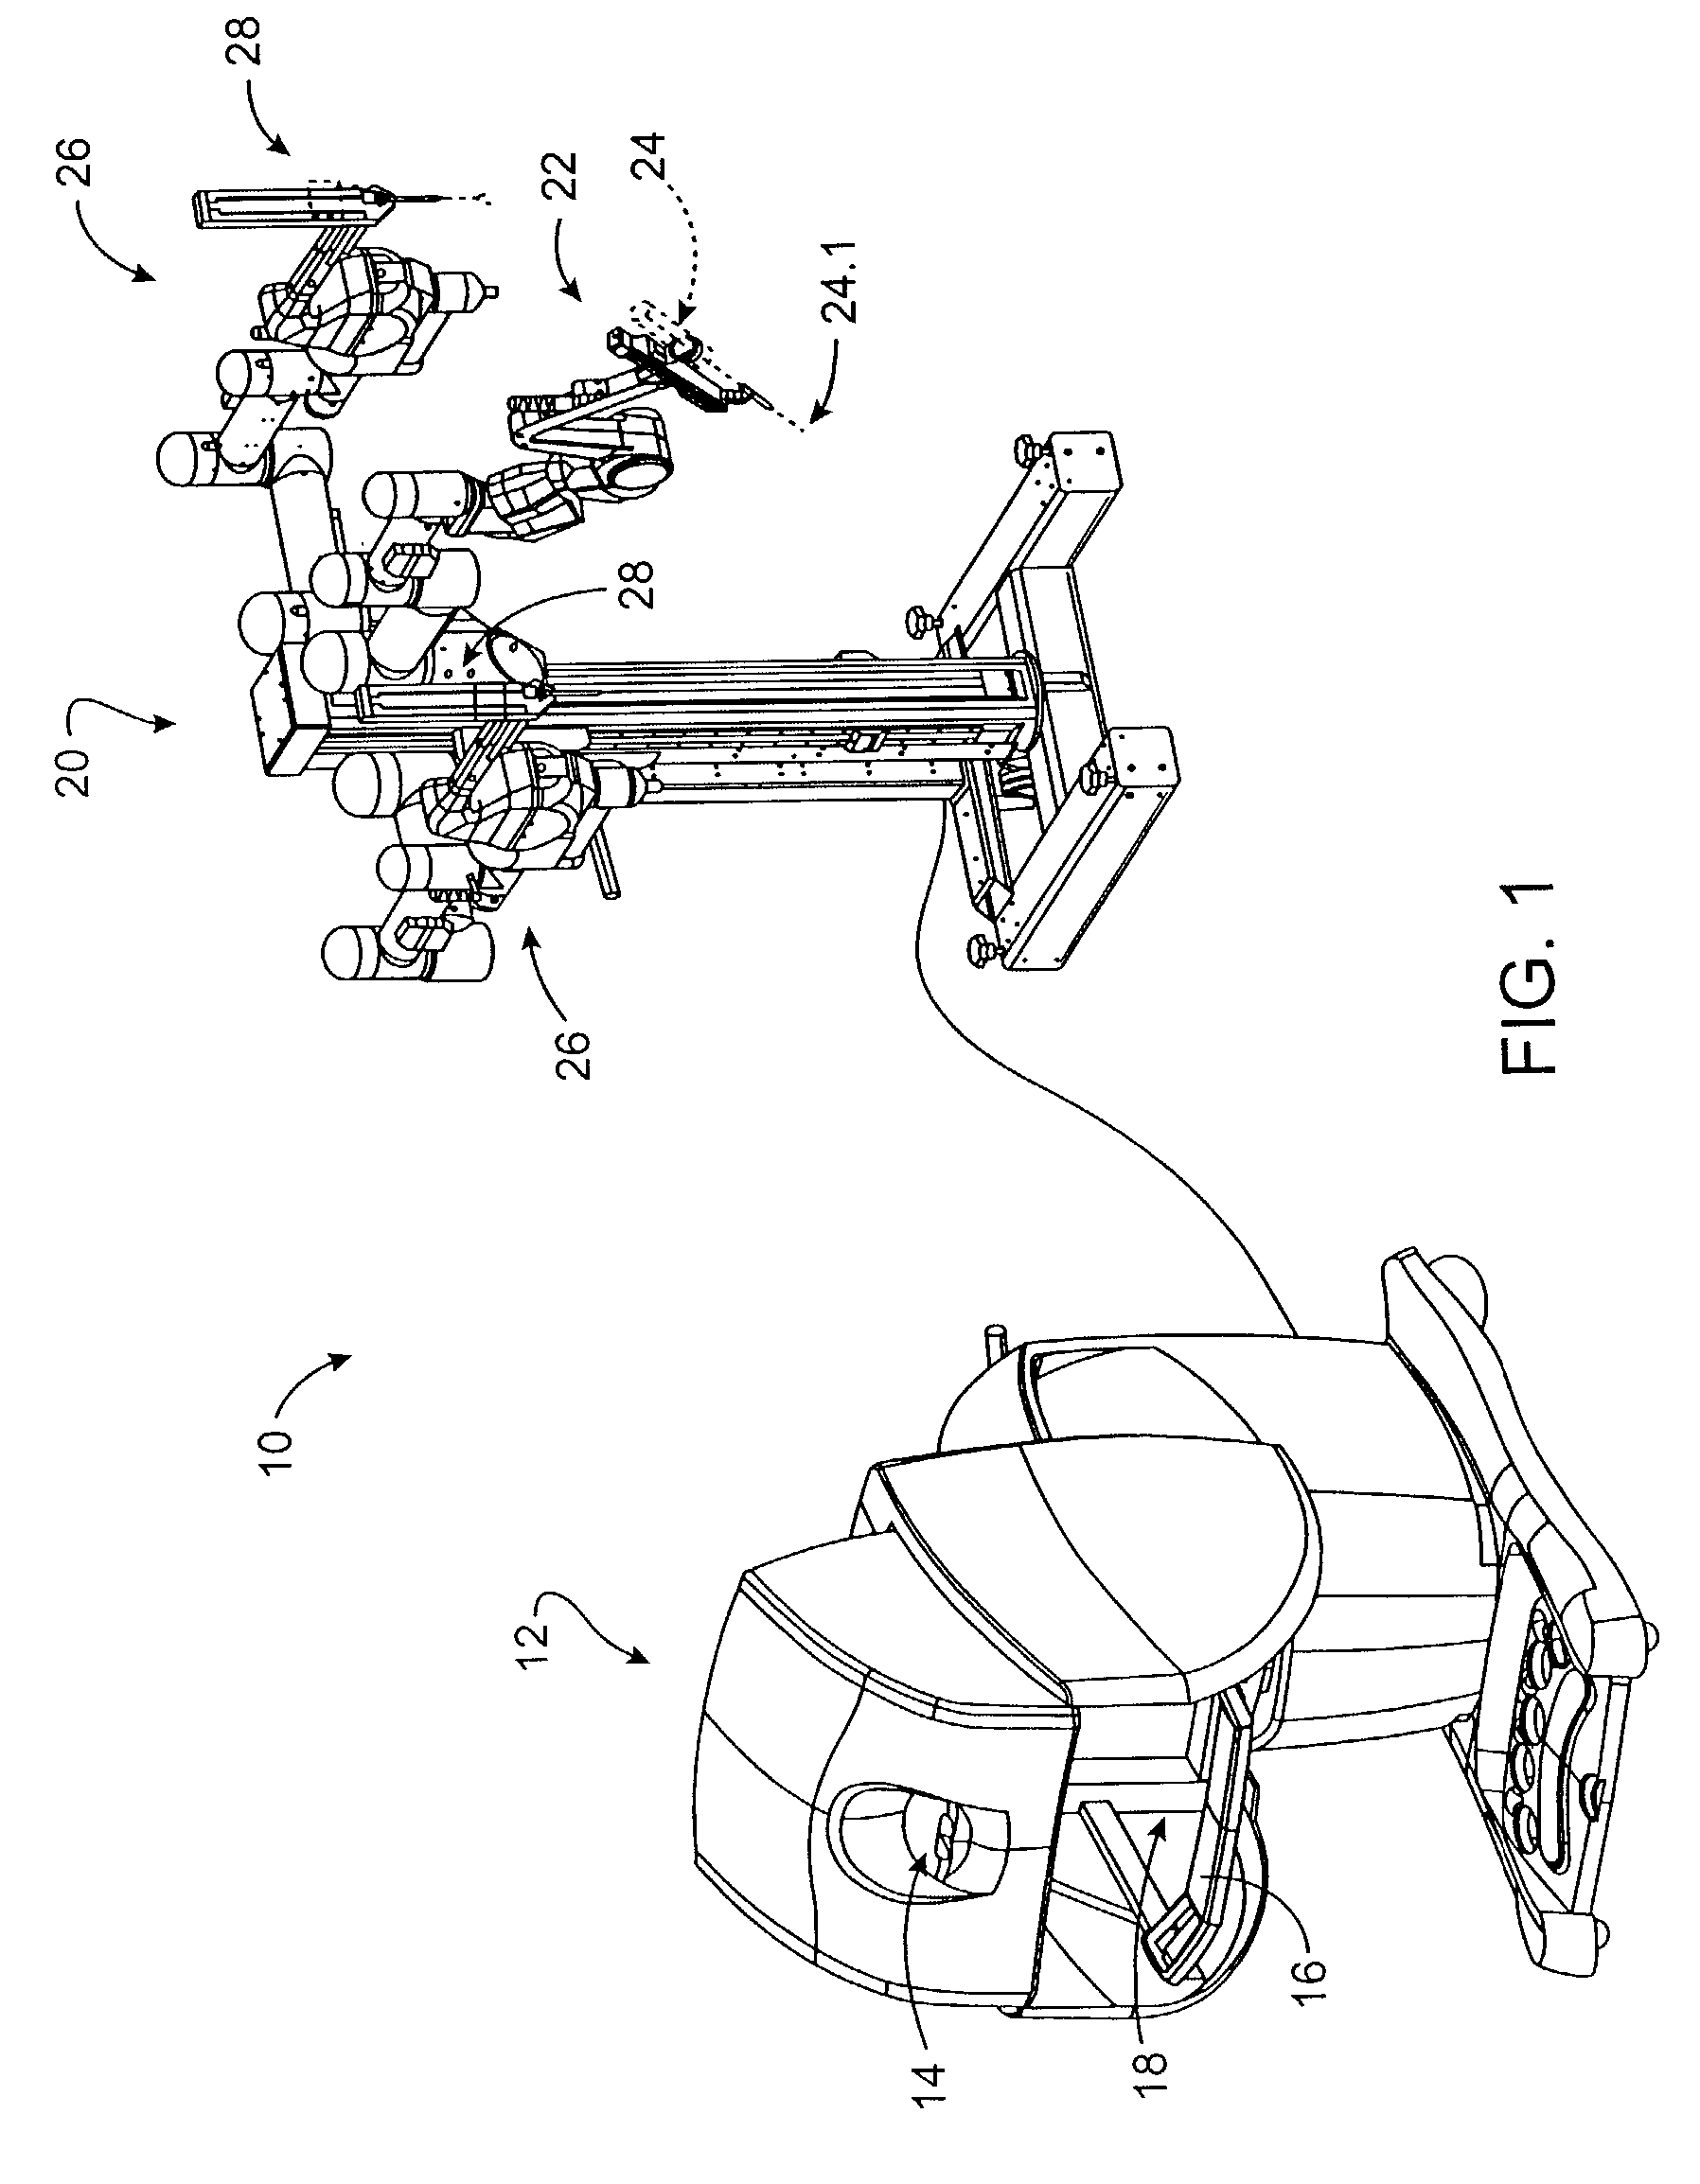 Devices and methods for presenting and regulating auxiliary information on an image display of a telesurgical system to assist an operator in performing a surgical procedure